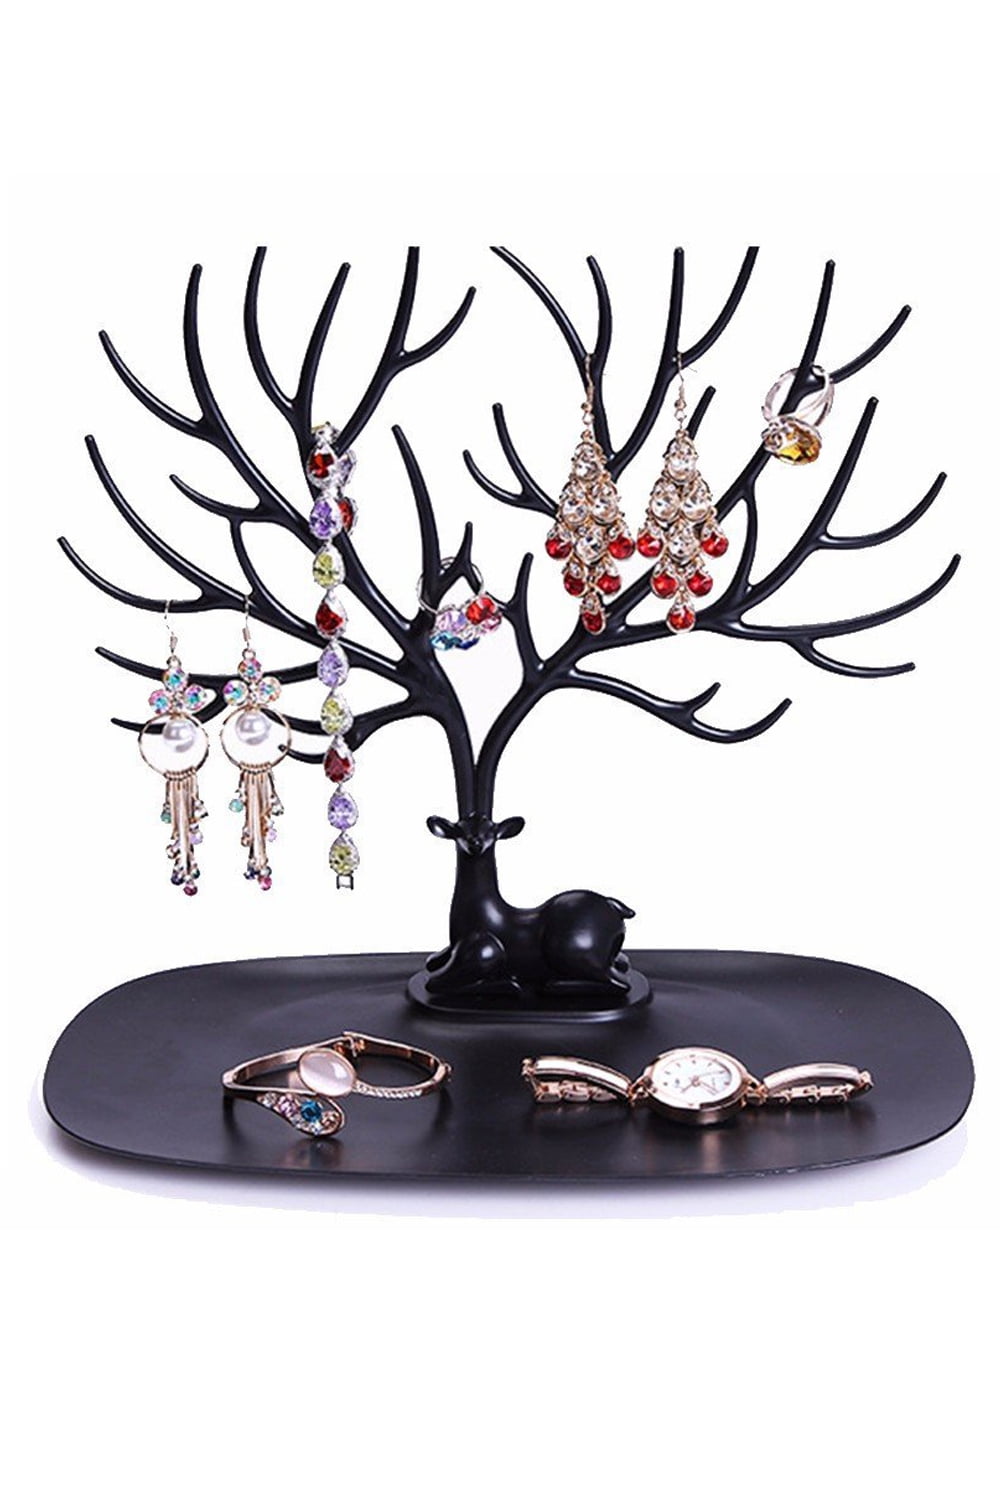 Deer Tree Jewelry Stand Display Rack Portable Necklace Earring Organizer Holder 